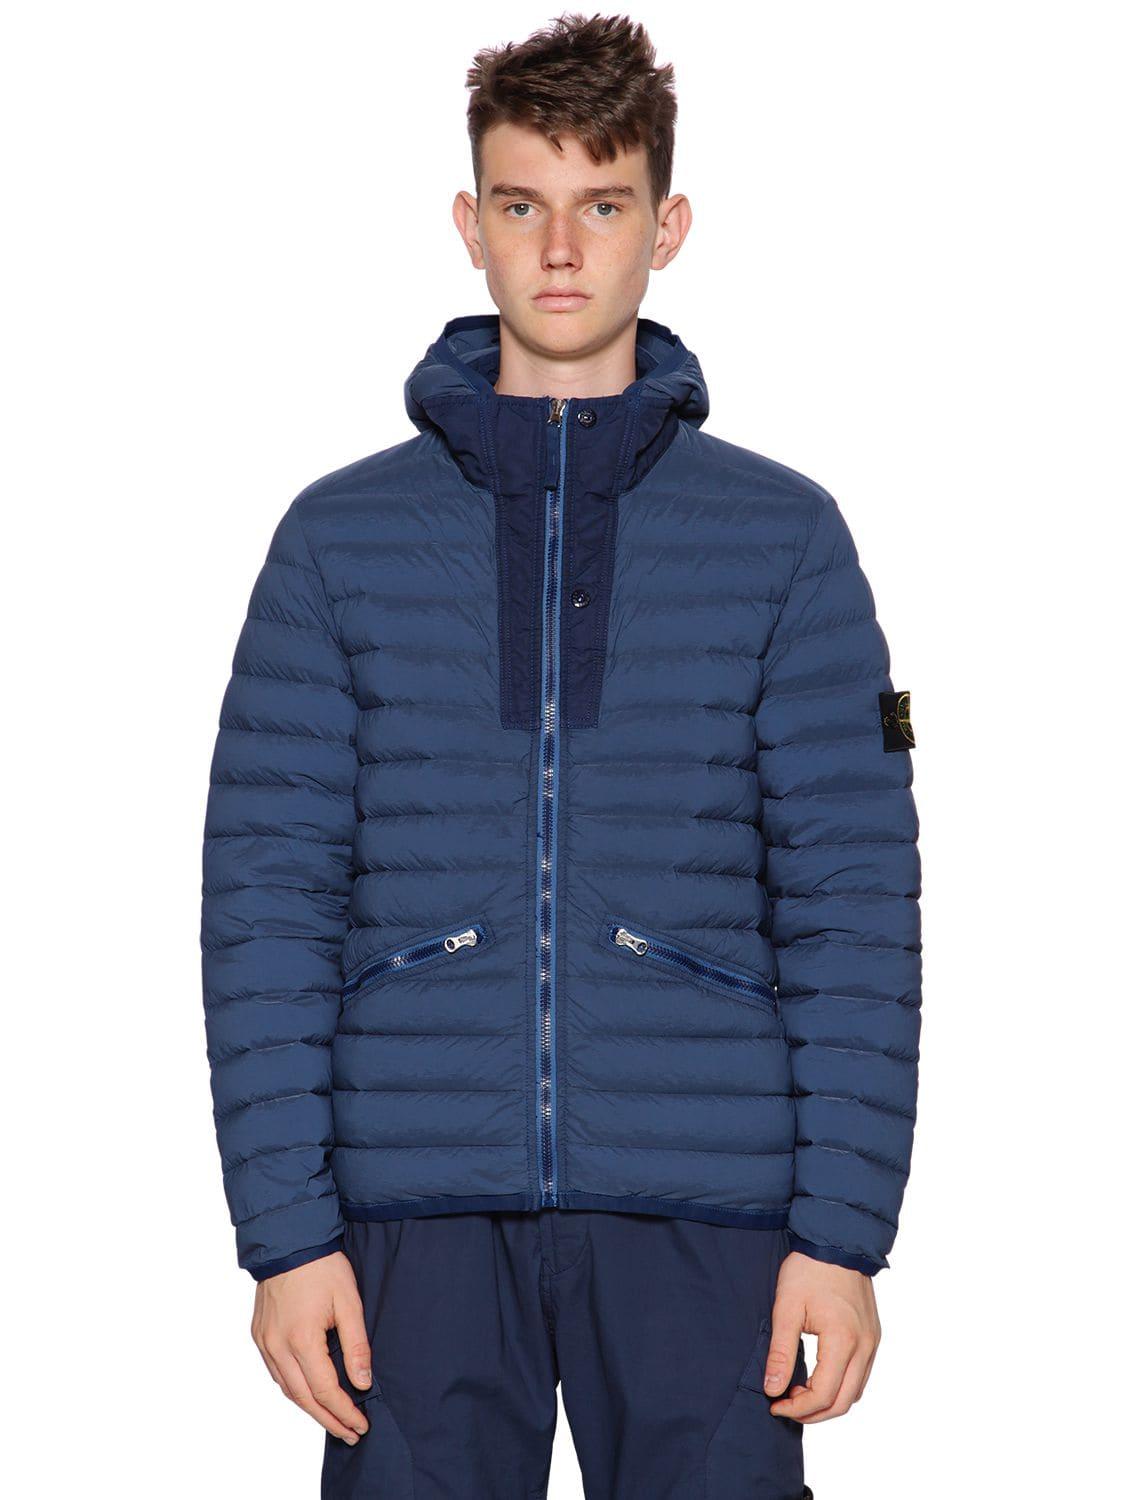 Stone Island Synthetic Loom Woven Nylon Down Jacket in Marine Blue (Blue)  for Men - Lyst